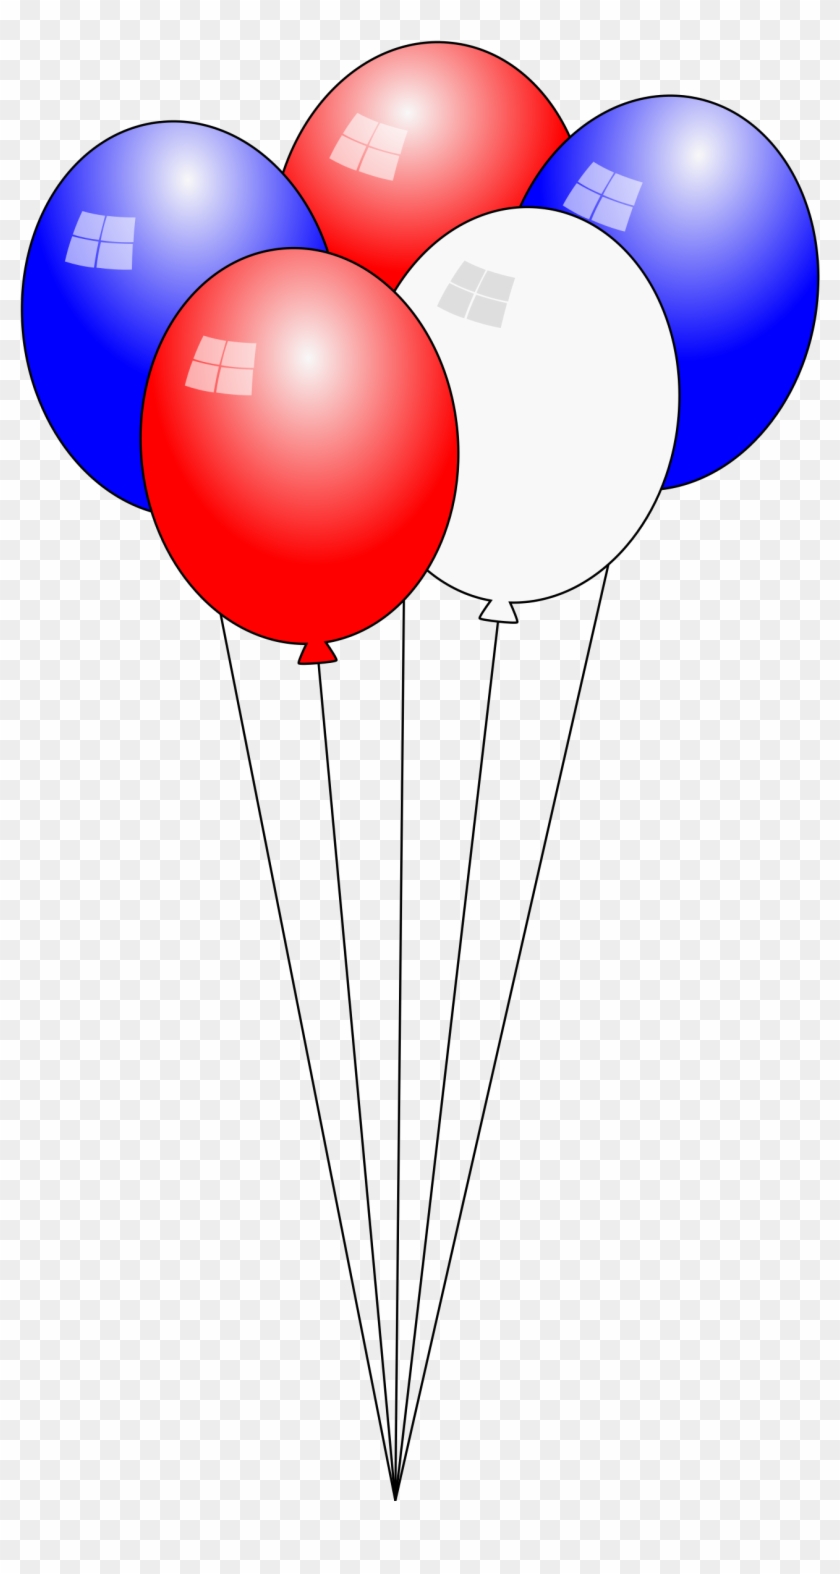 Big Image - Red White And Blue Balloons Png Clipart #400199